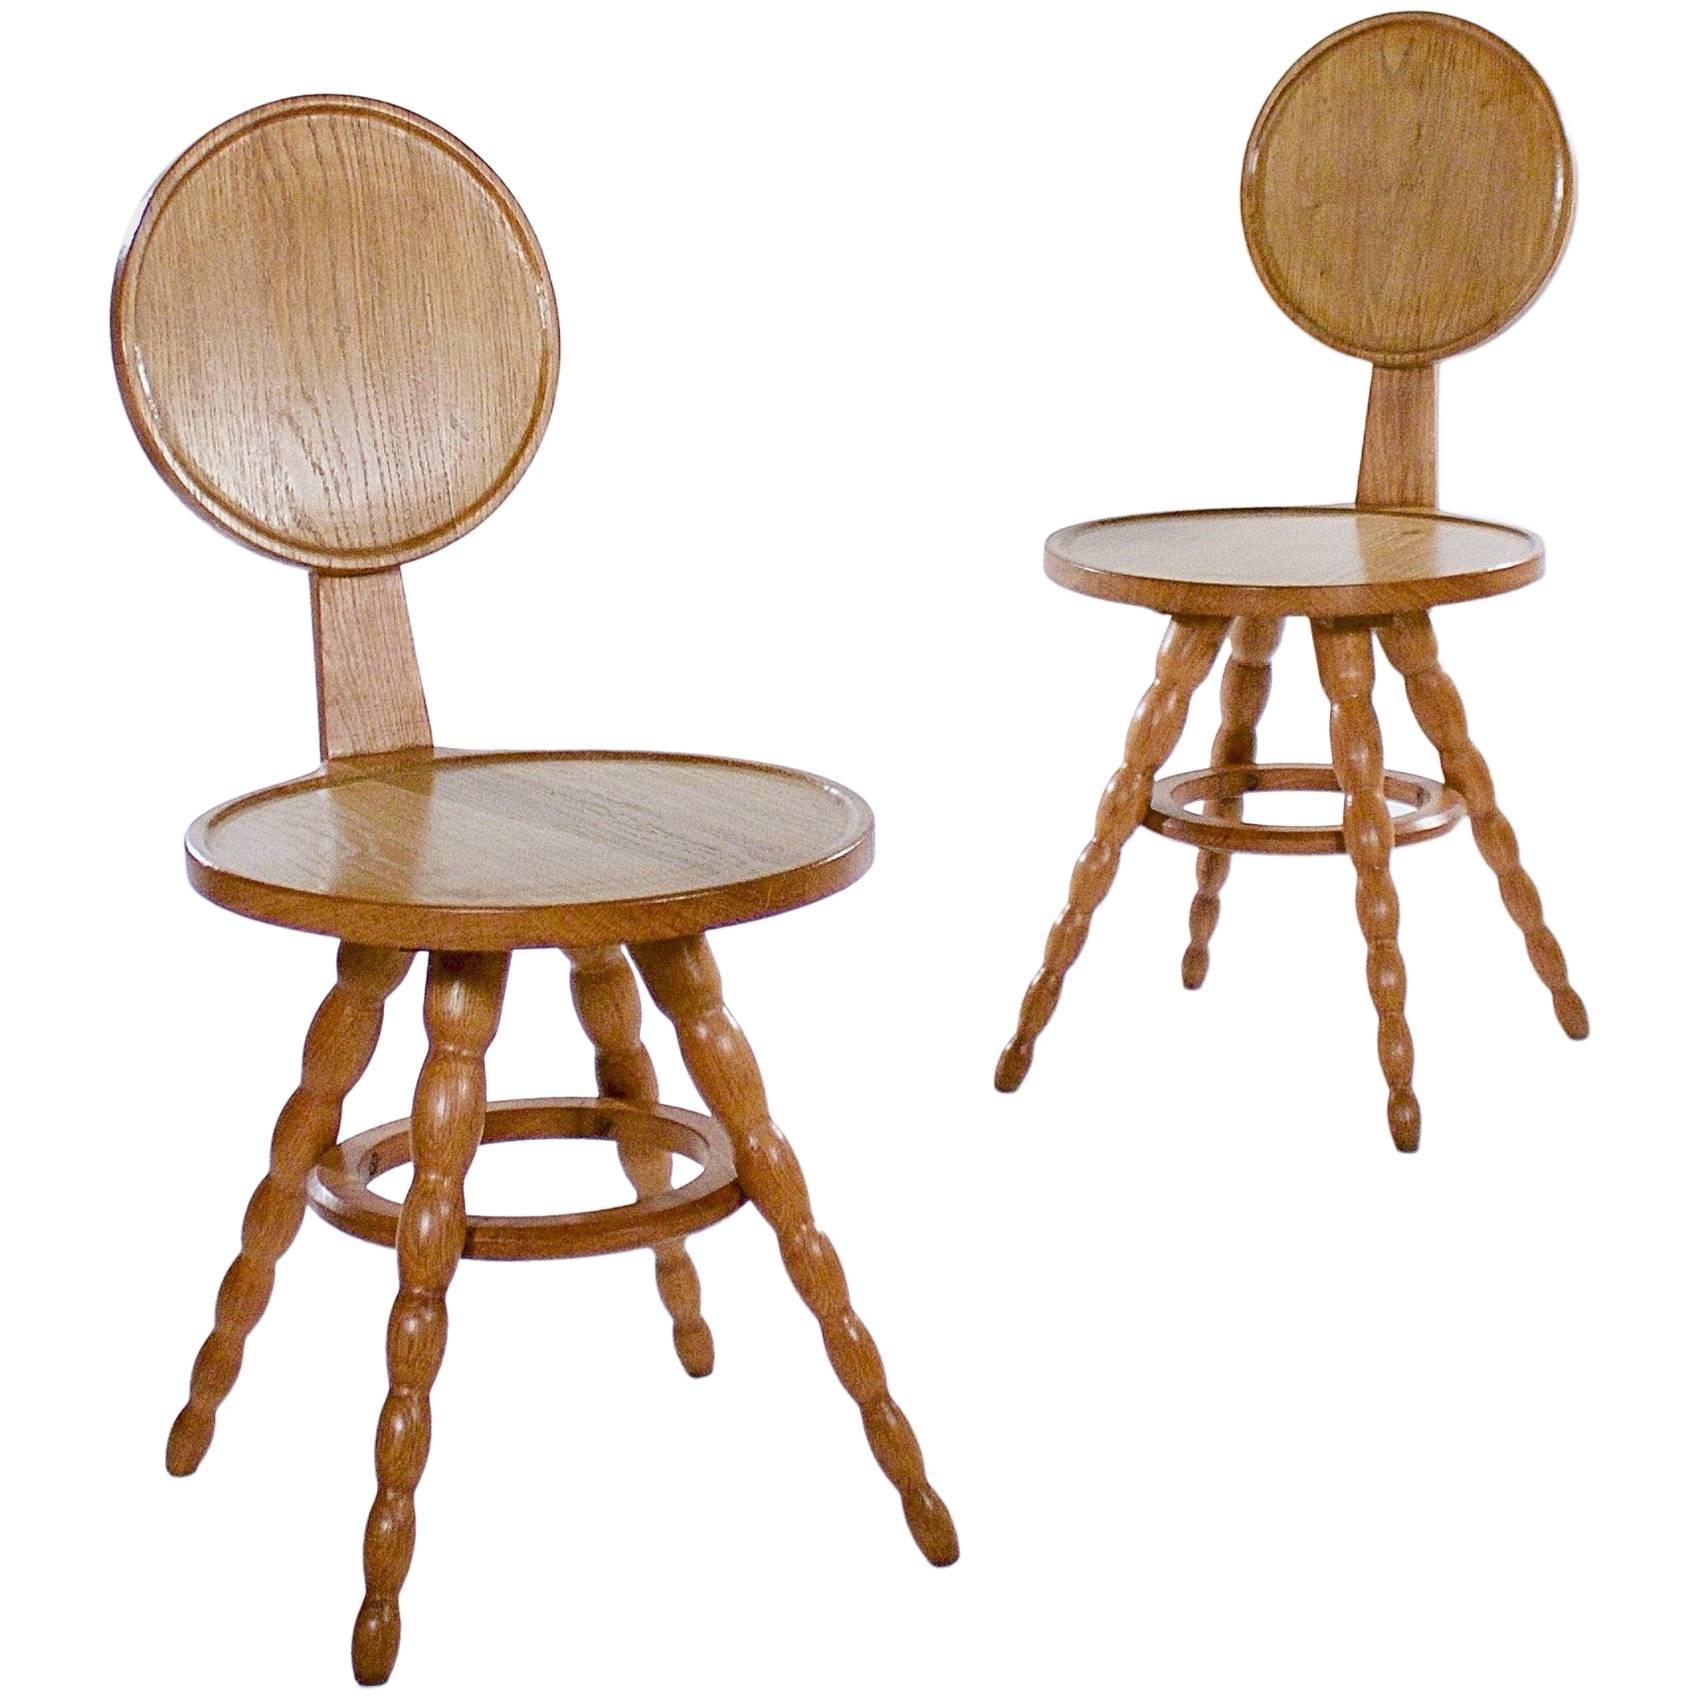 Pair of Unusual Oak Hall Chairs with Bobbin Legs